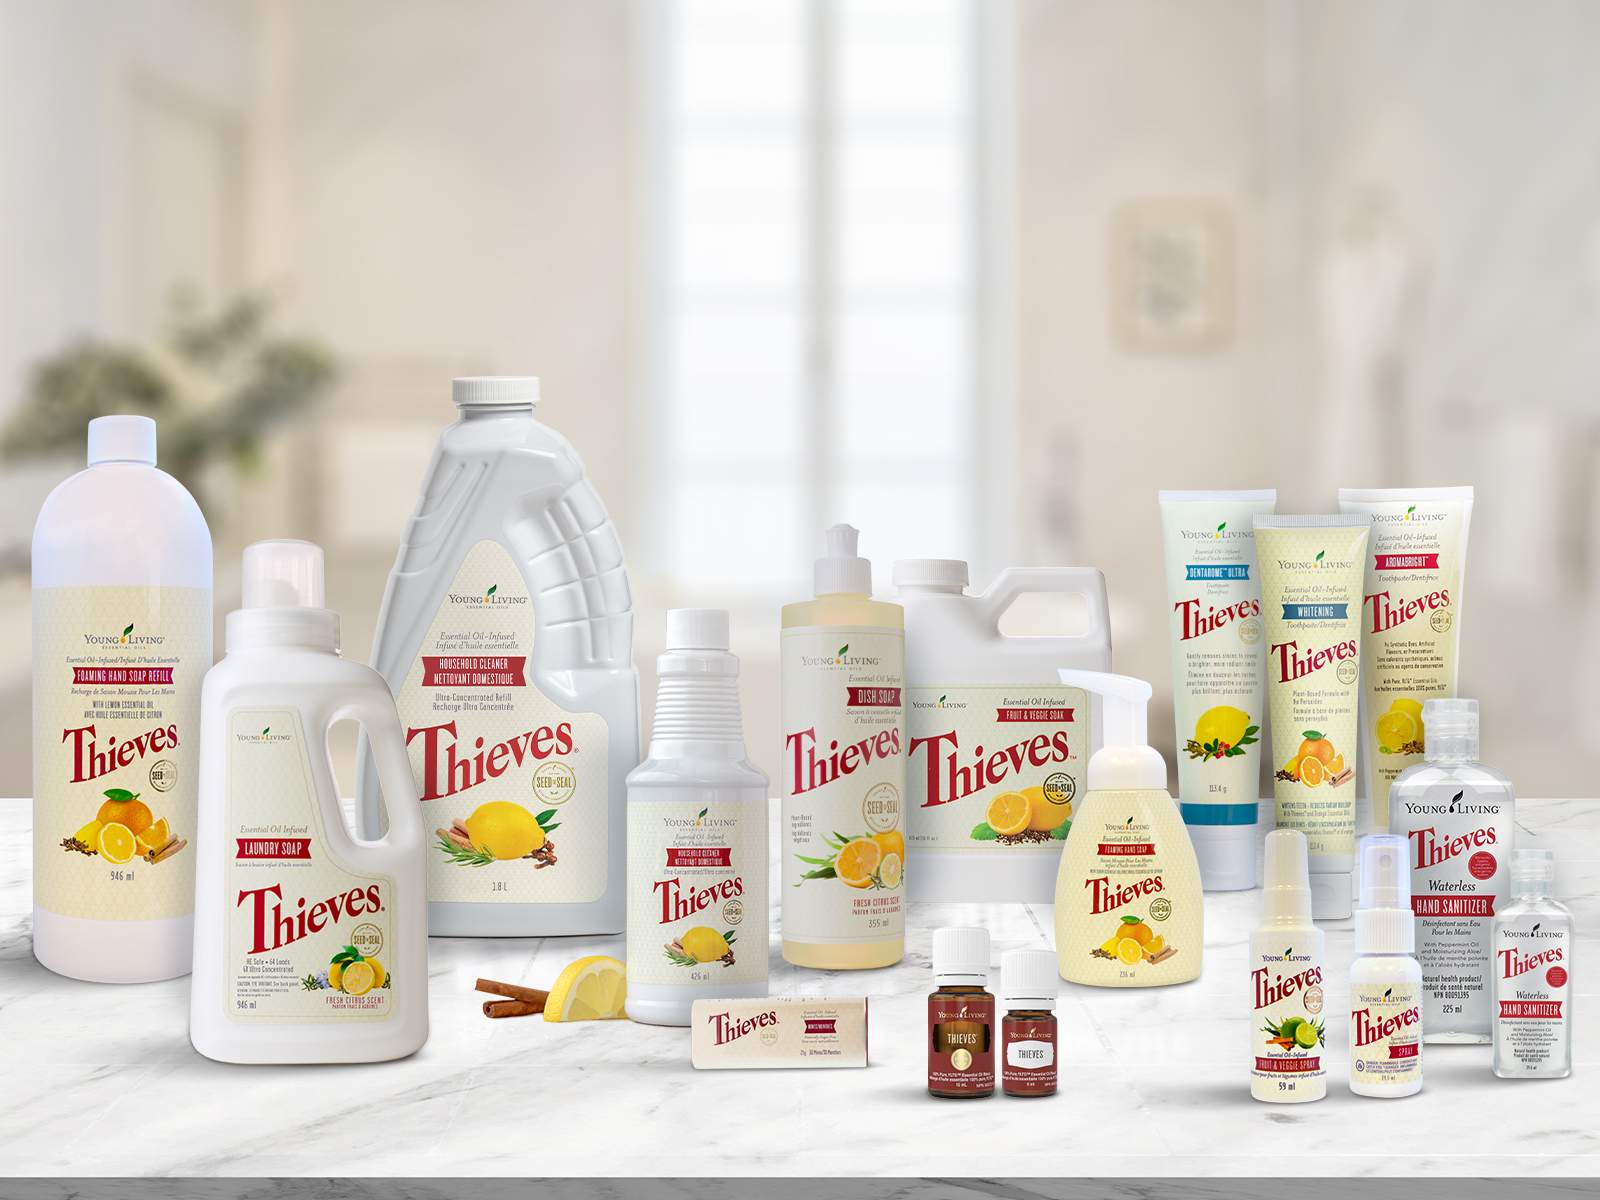 Thieves product line: made with plant based ingredients!